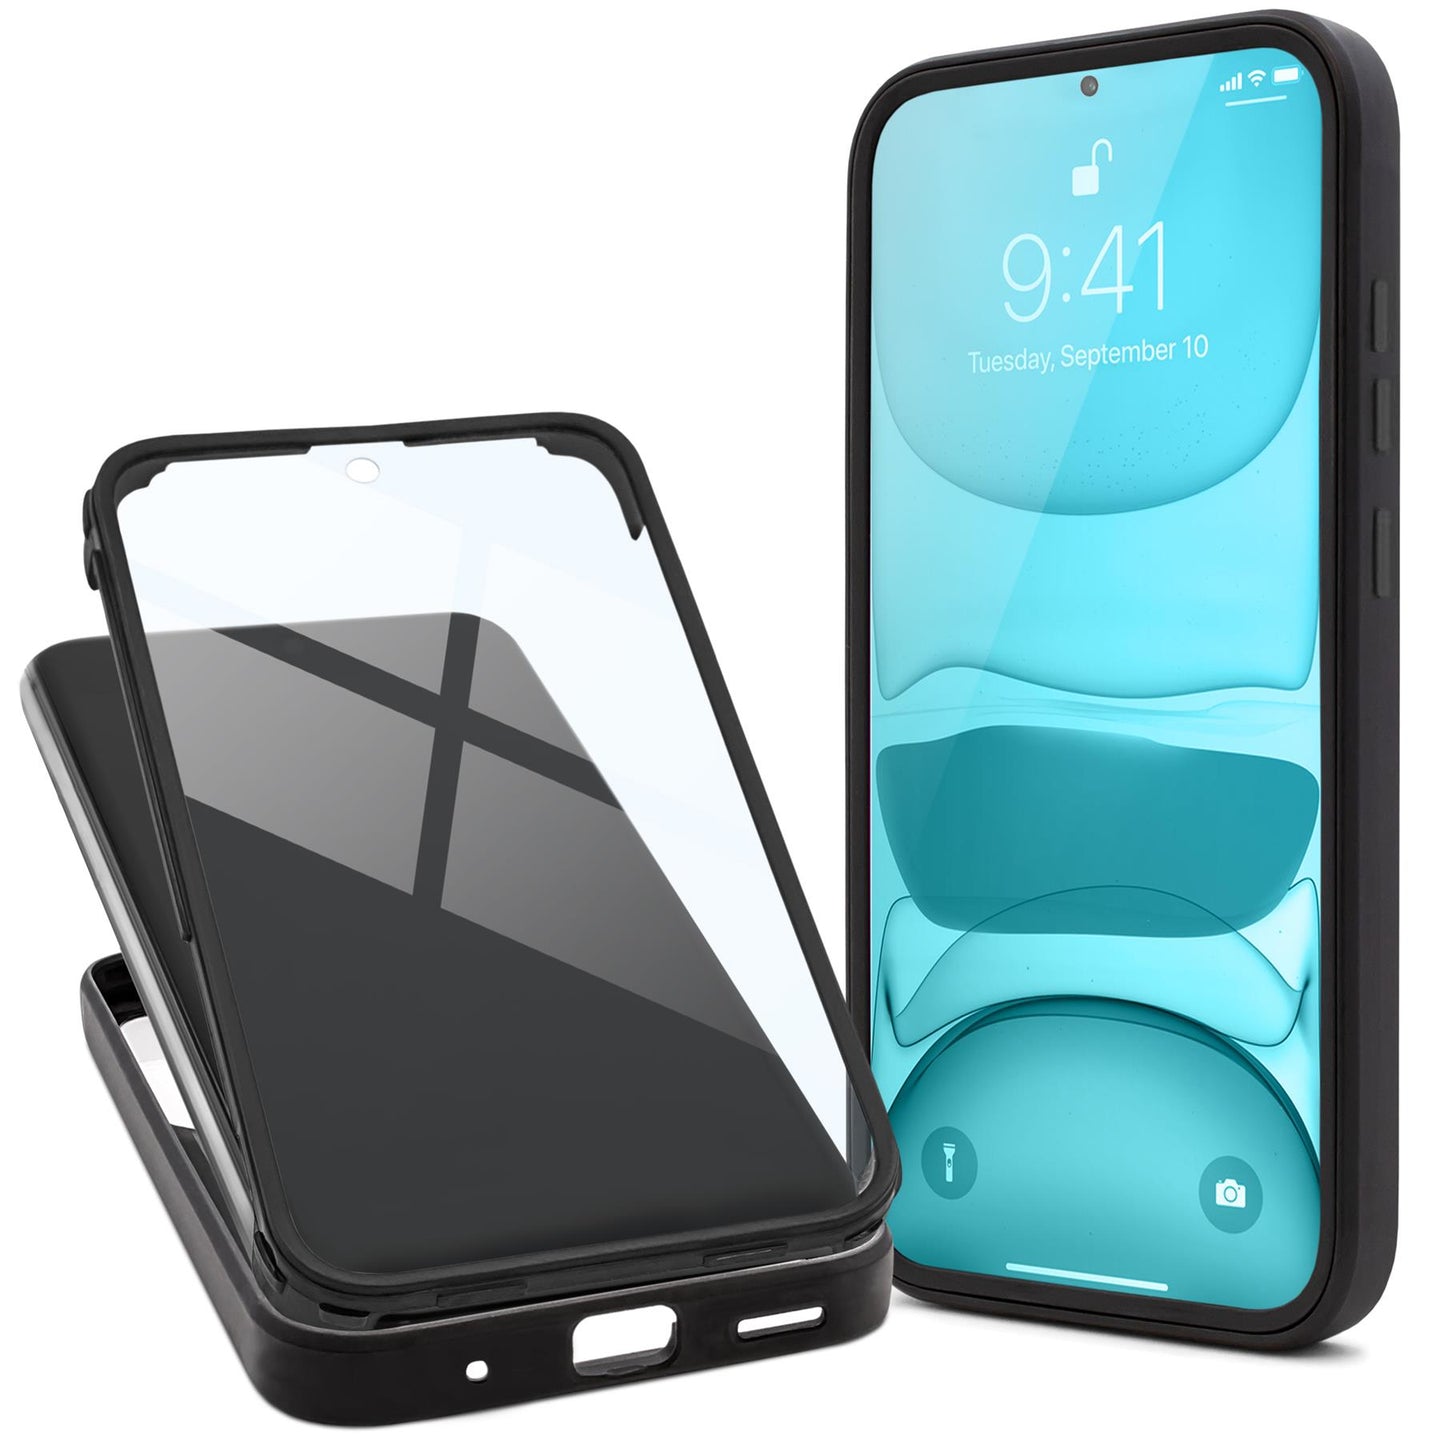 Moozy 360 Case for Xiaomi 12 Pro - Black Rim Transparent Case, Full Body Double-sided Protection, Cover with Built-in Screen Protector